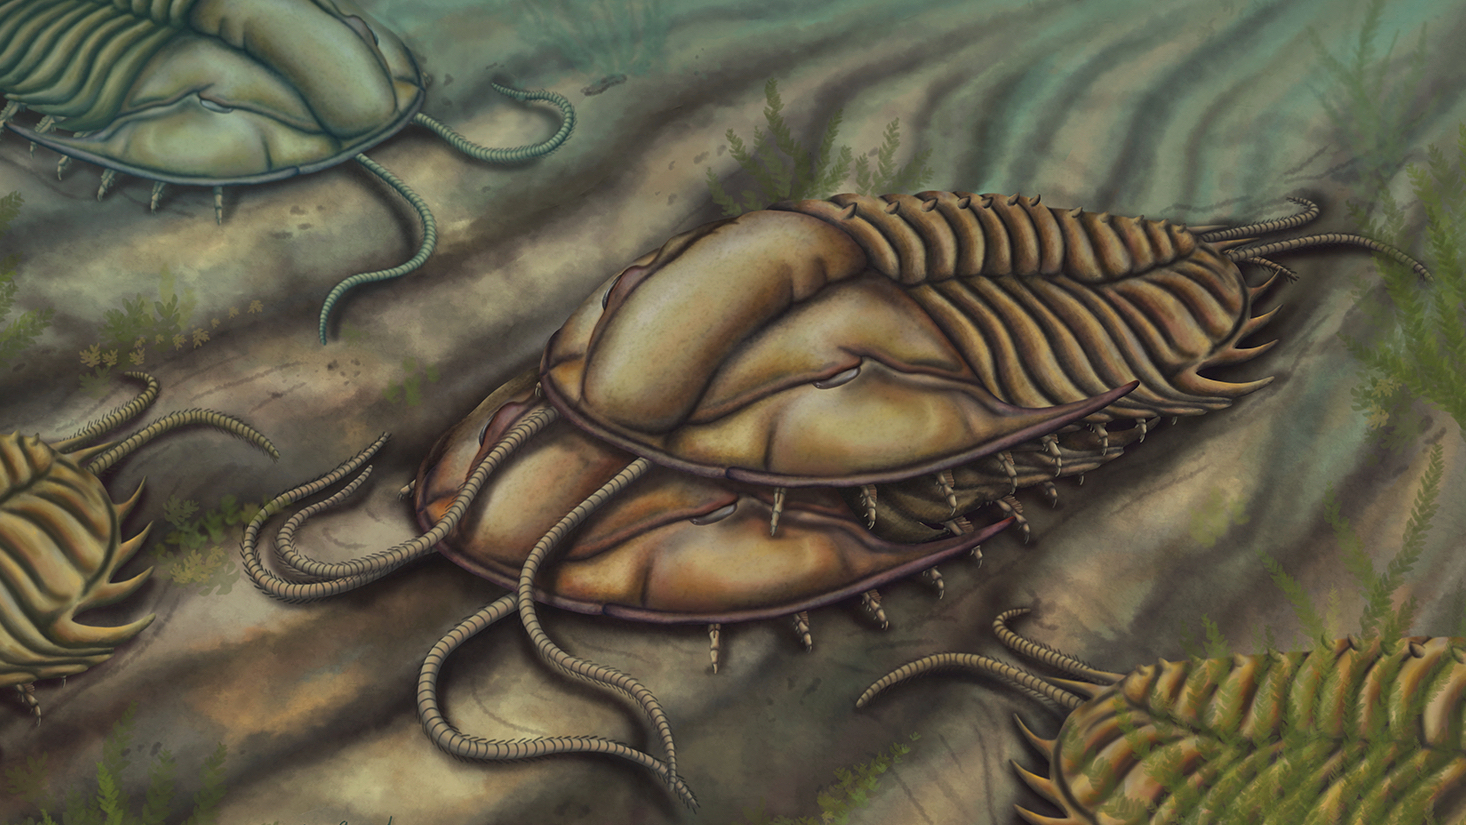 An illustration of two trilobites (Olenoides serratus) mating on the seafloor during the Cambrian period, with the male (top) hugging the female below.